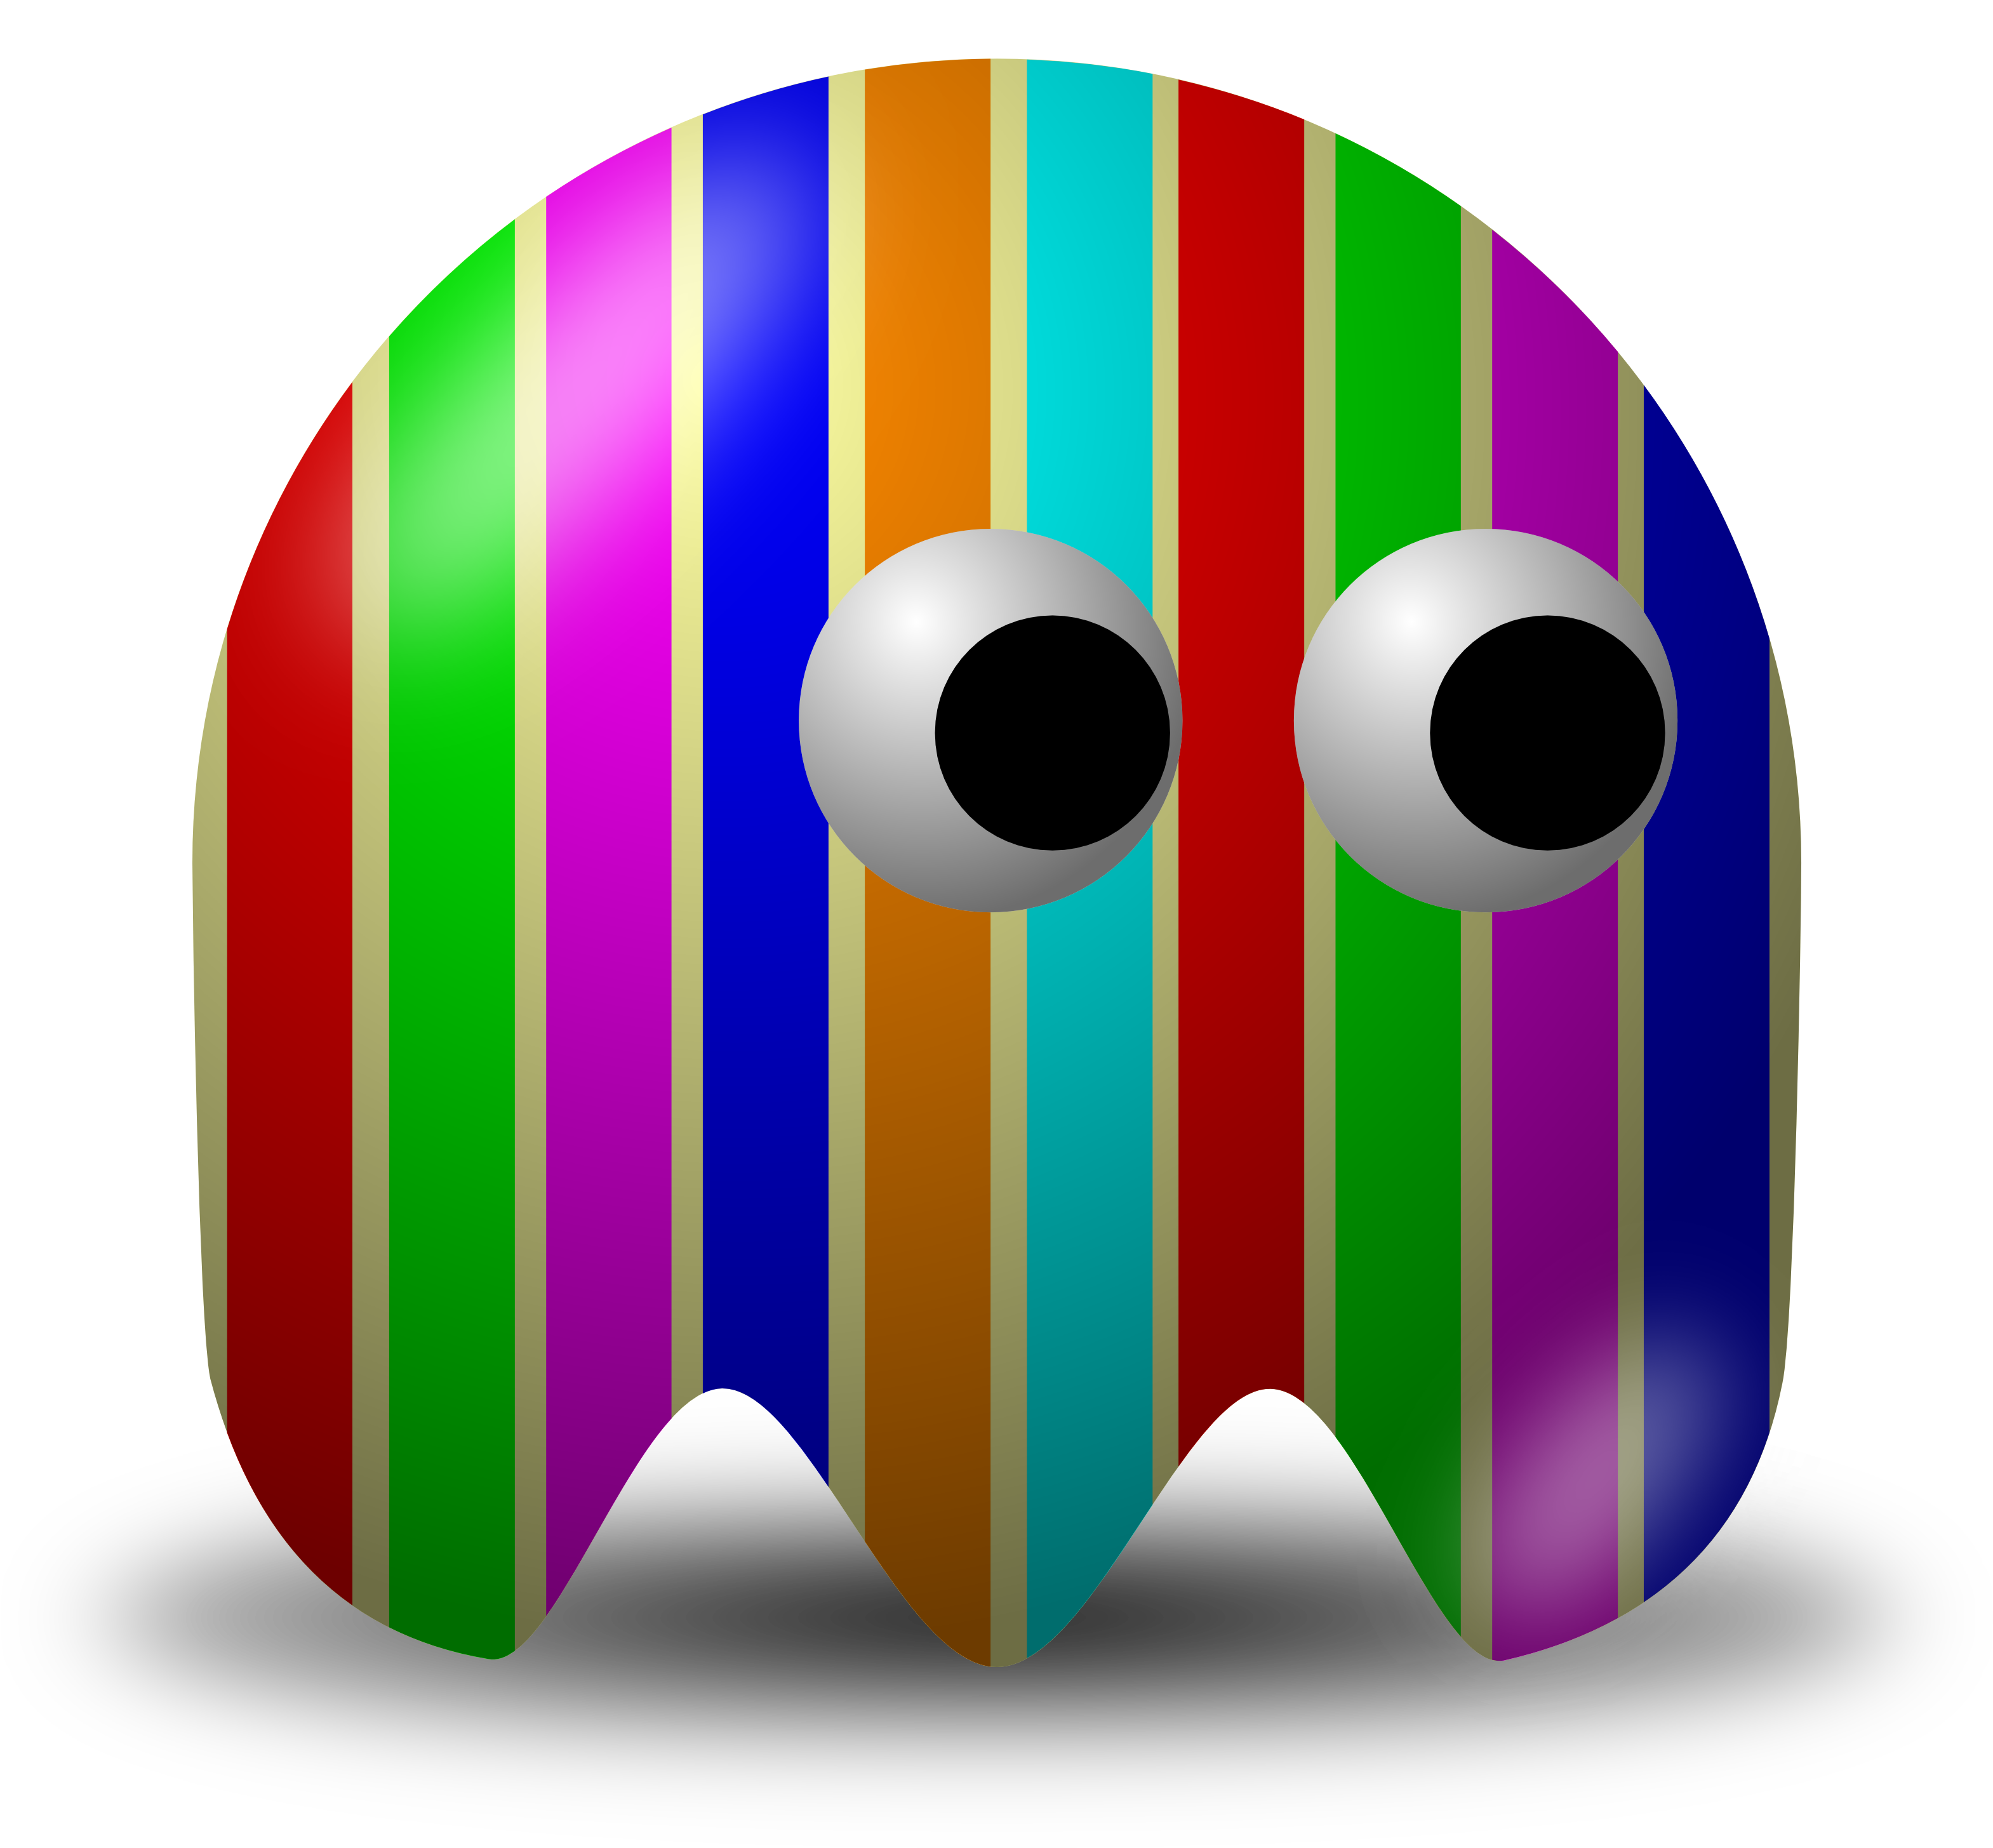 Colorful Stripes Composited Over An Avatar Character - Pacman Baddies (3200x2953)